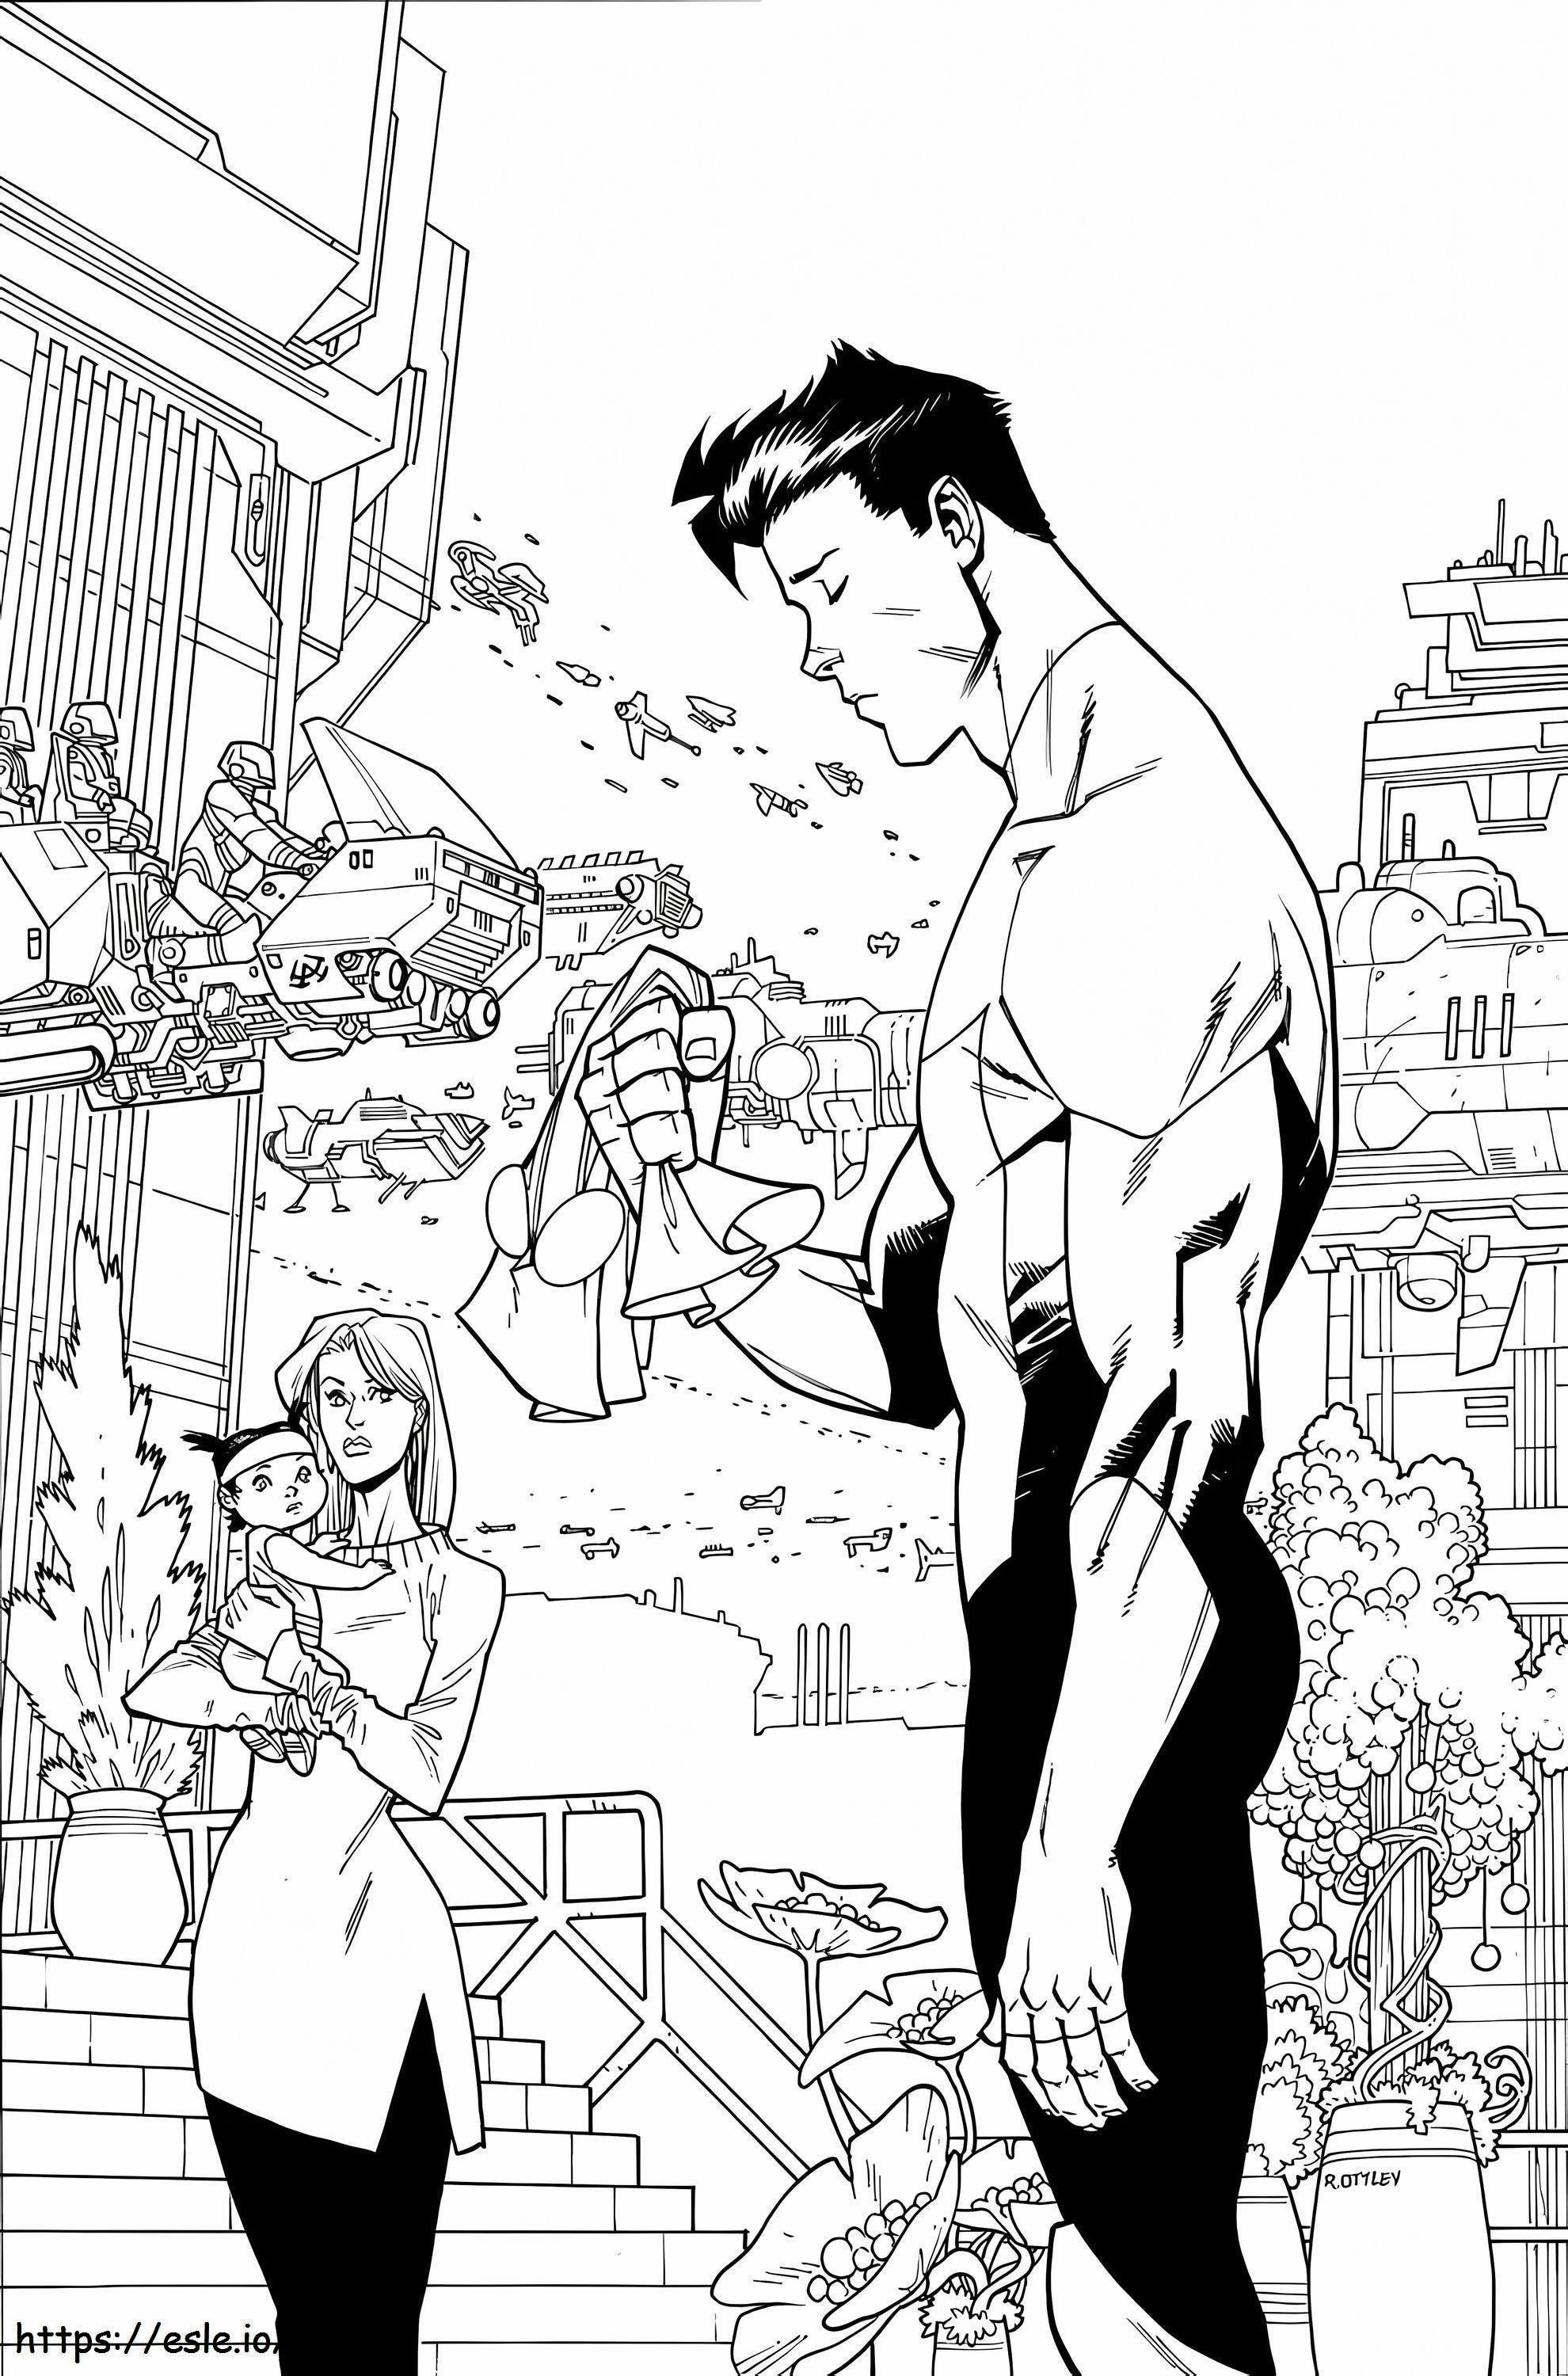 Invincible Unmask coloring page